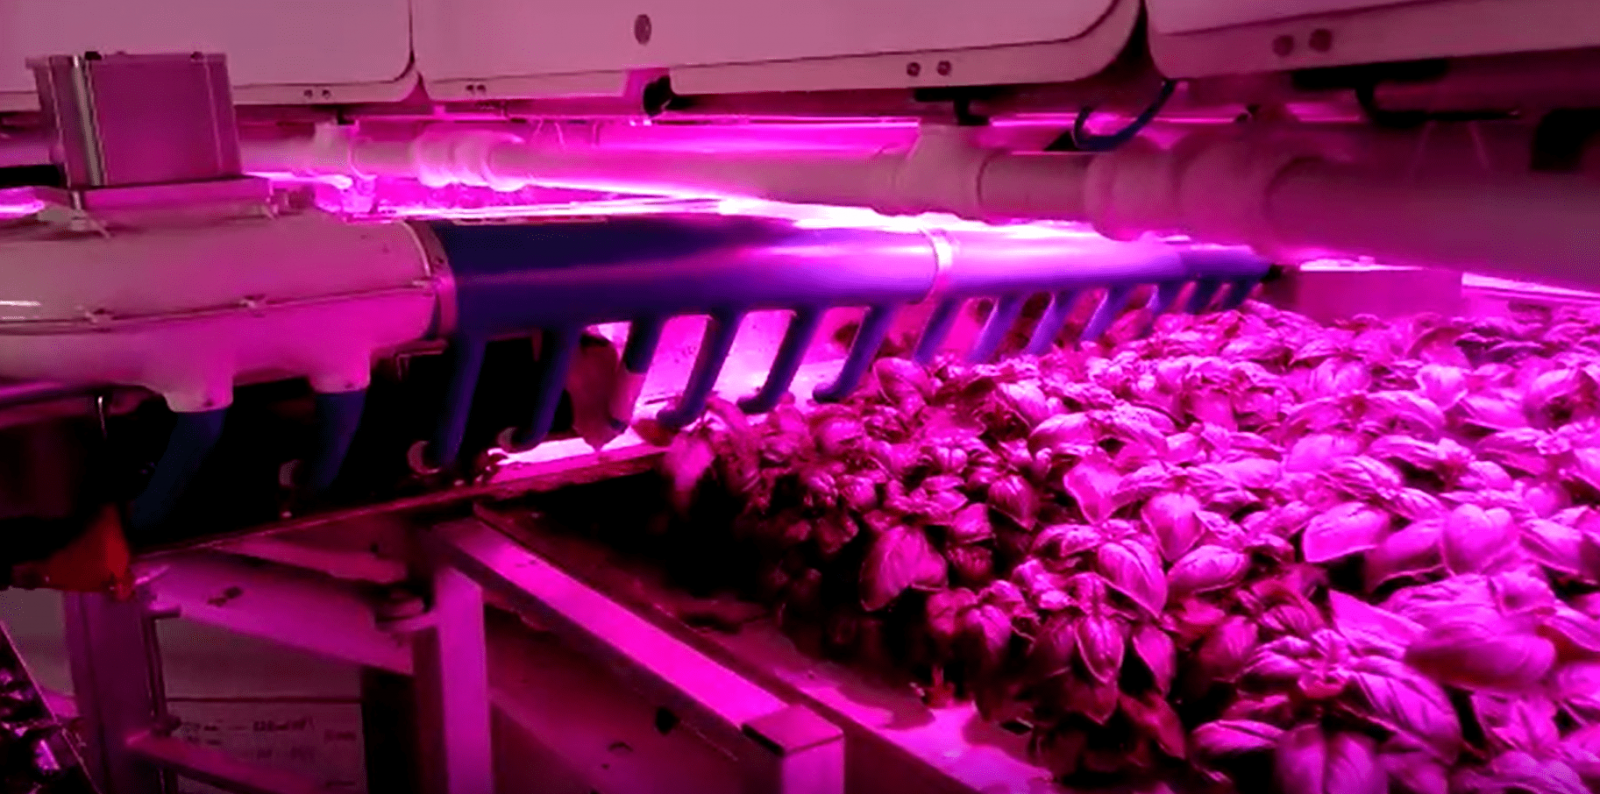 Do not move plants: We bring the automation to the crop